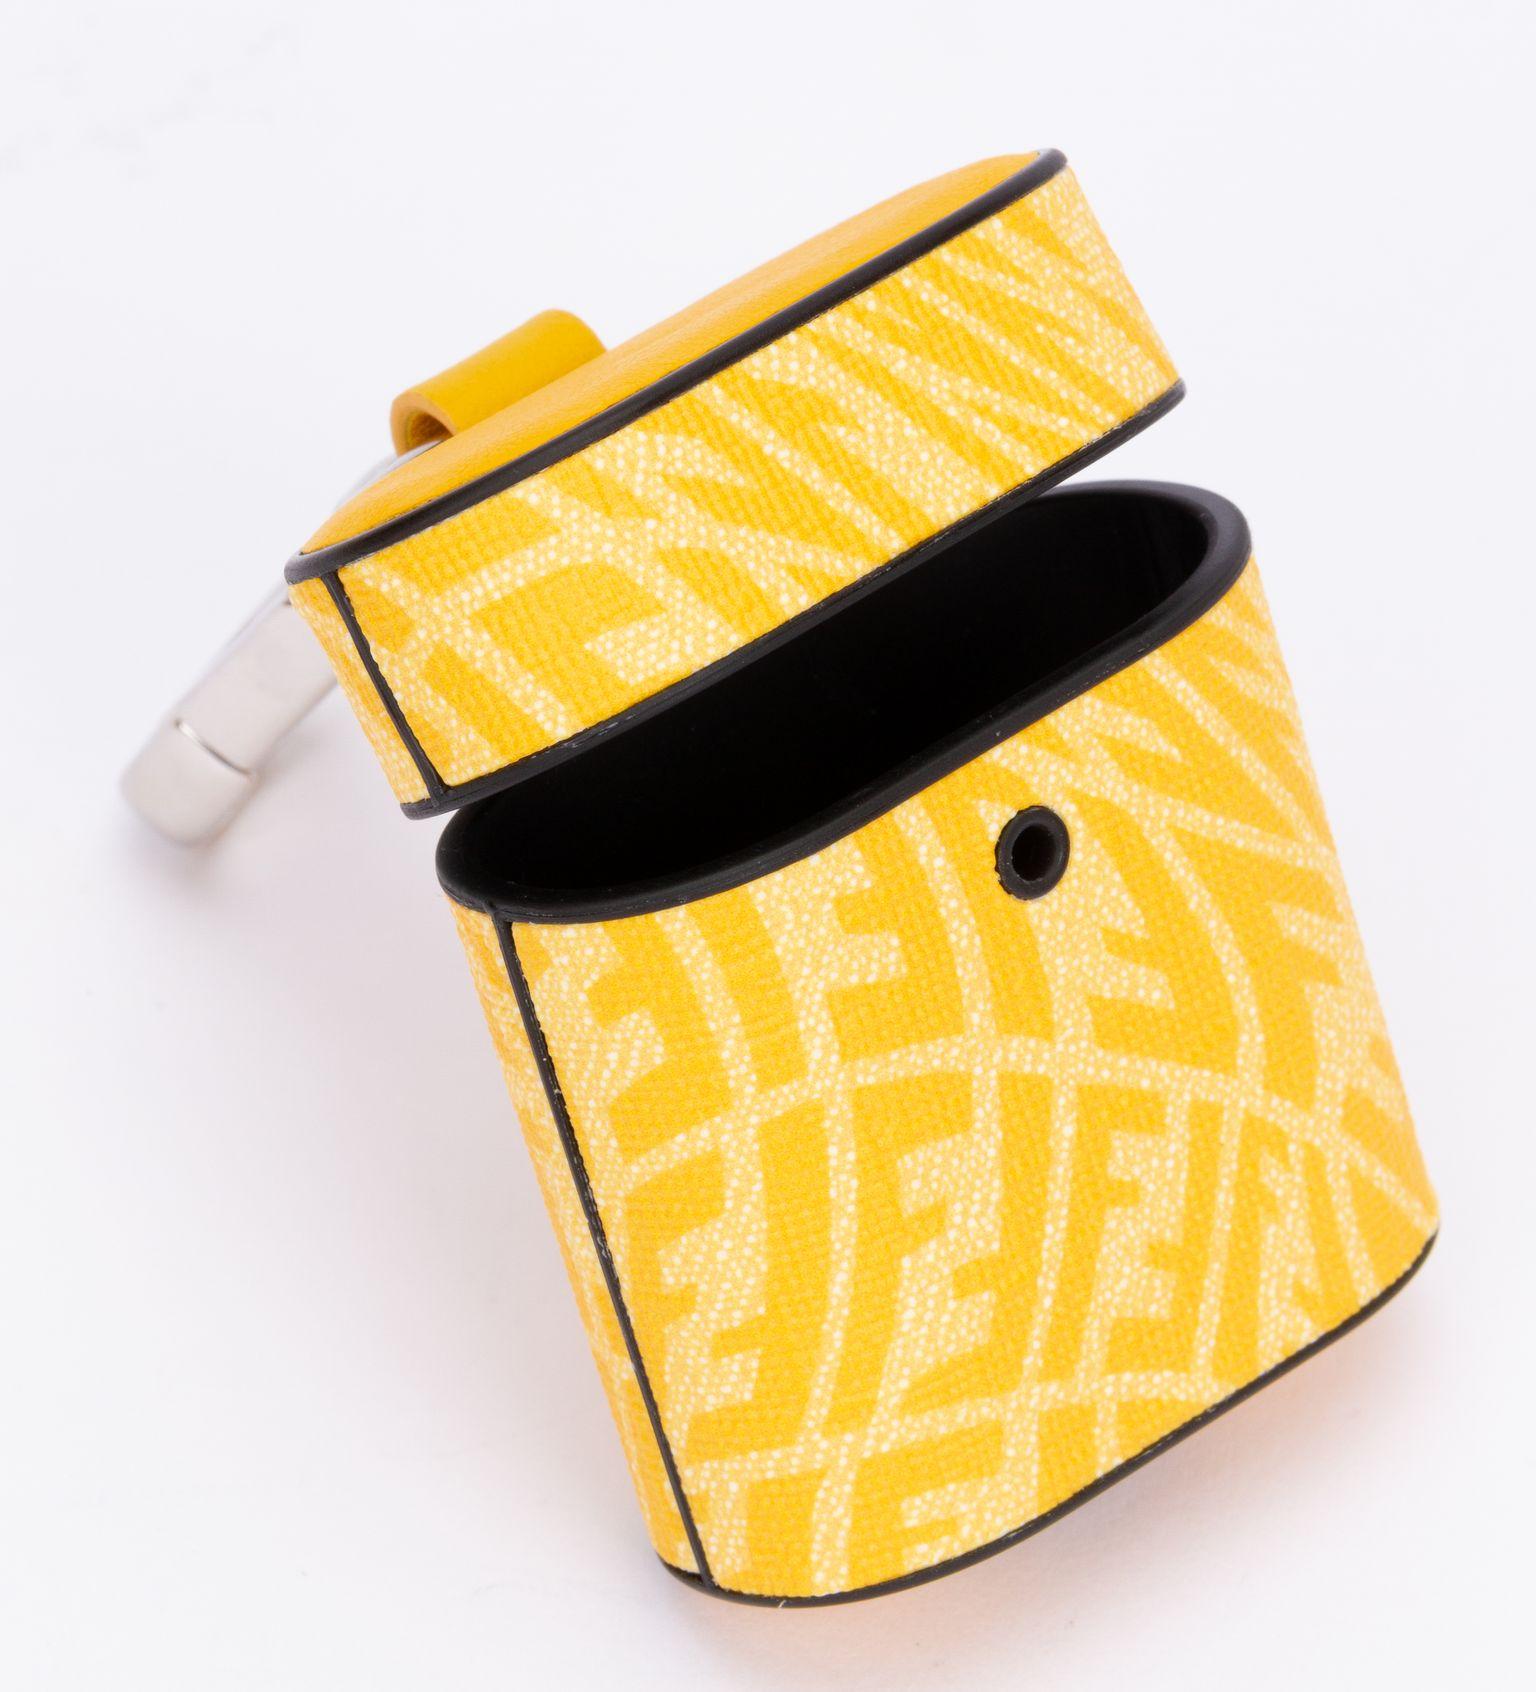 Fendi air pods charm to attach to a bag. This piece can clip on all different sizes of bags. It has a zip so it's perfect to store stuff. The charm comes in a vibrant vertigo yellow print. It is brand new and comes with the booklet, original box and